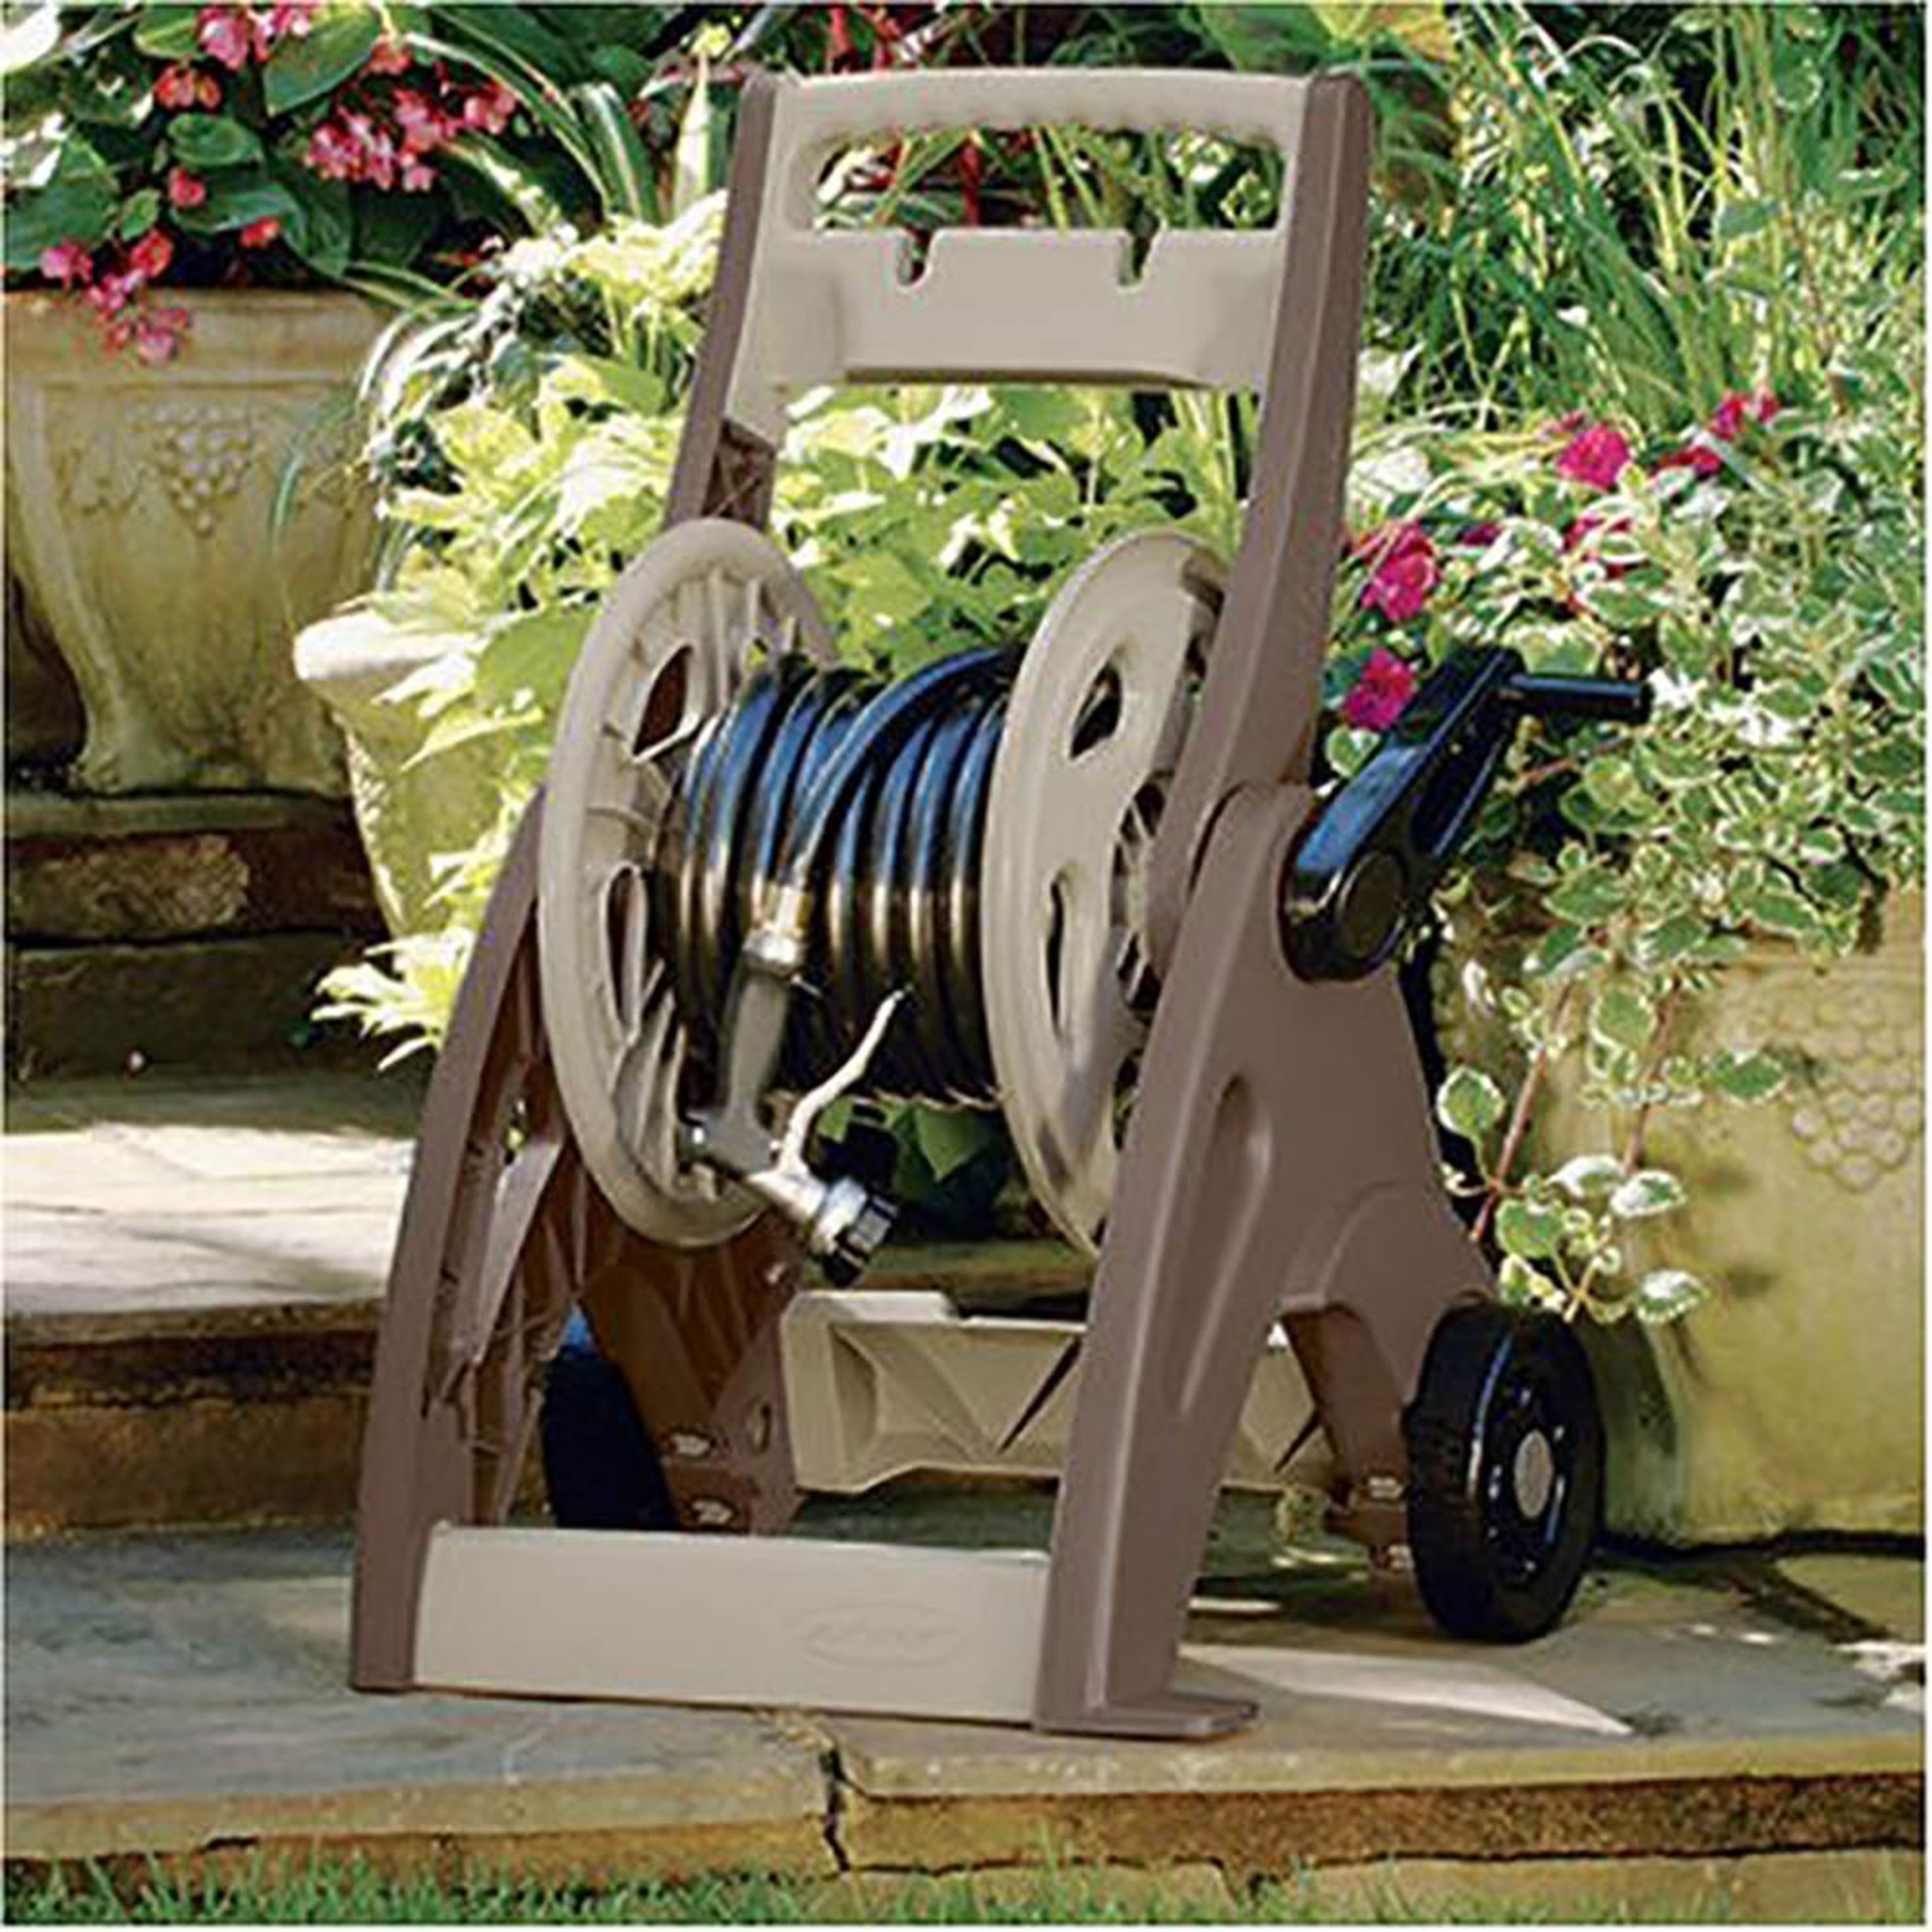 Suncast CPLJNF175BD Resin Garden Reel Hose Cart Caddy for 175-Foot 5/8" Vinyl Hose with Crank Handle and Wheels, Beige (2 Pack) - image 3 of 8